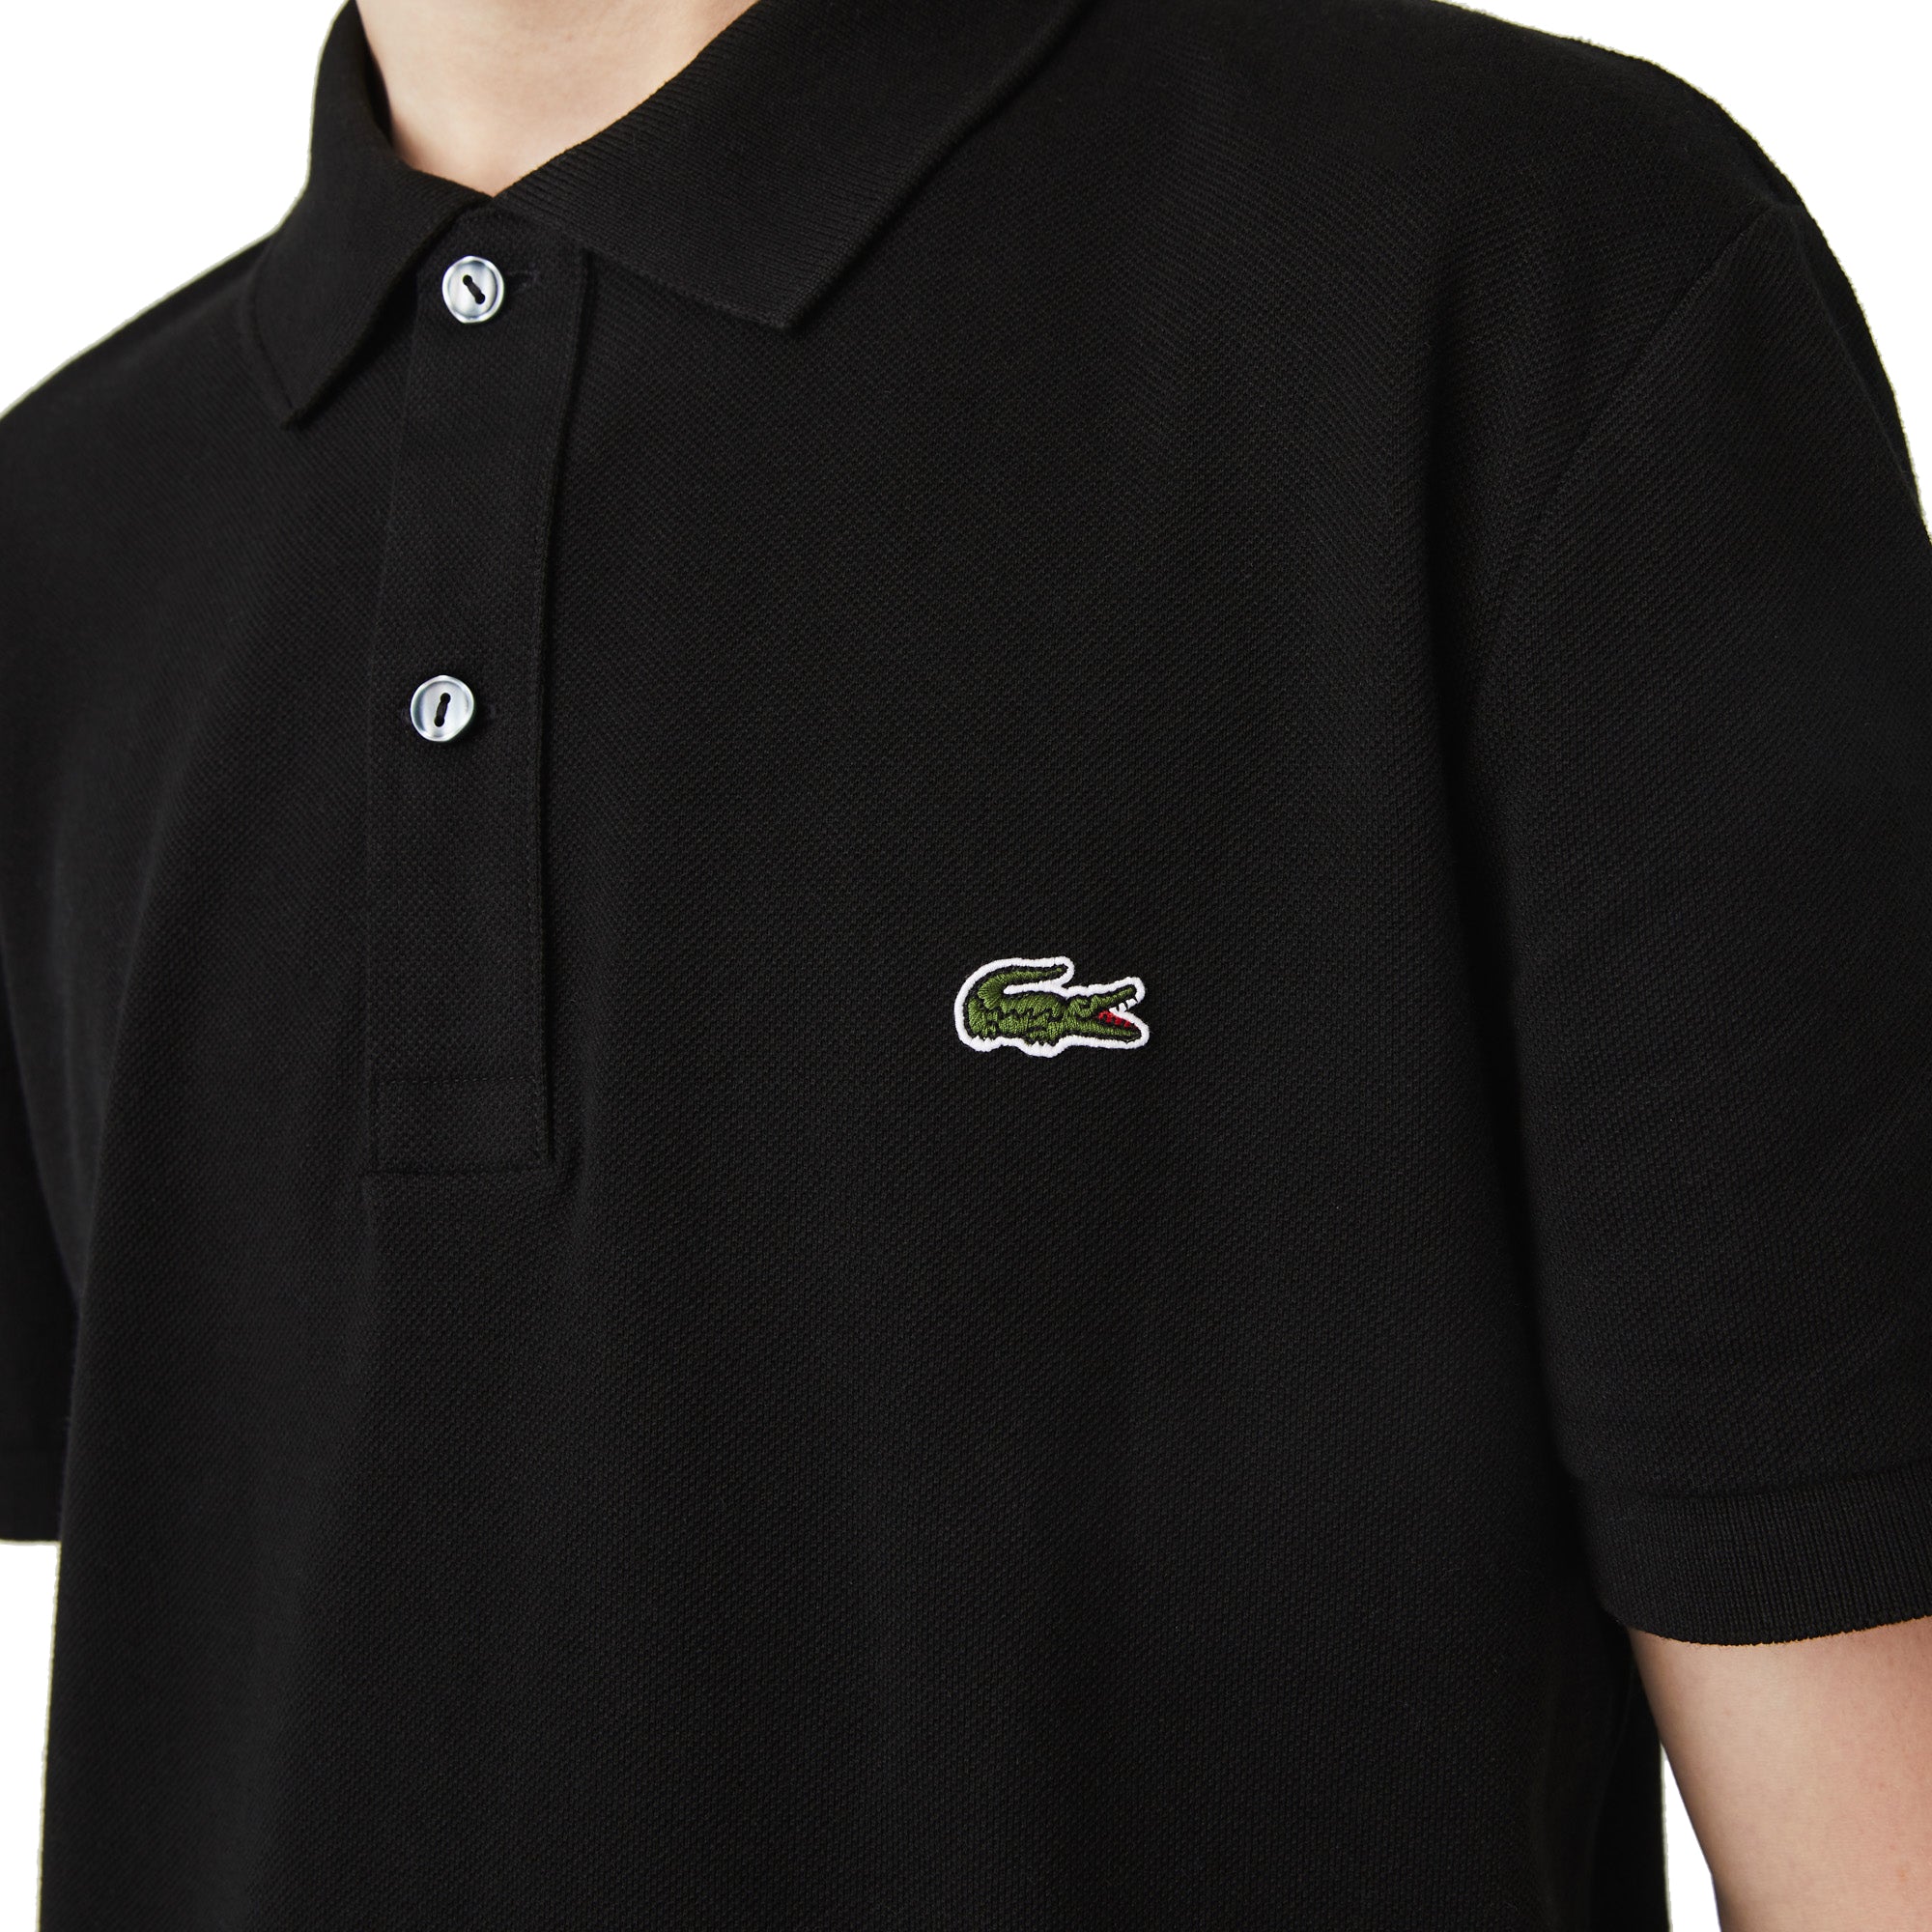 Lacoste Short Sleeved Slim Fit Polo PH4012 - Black